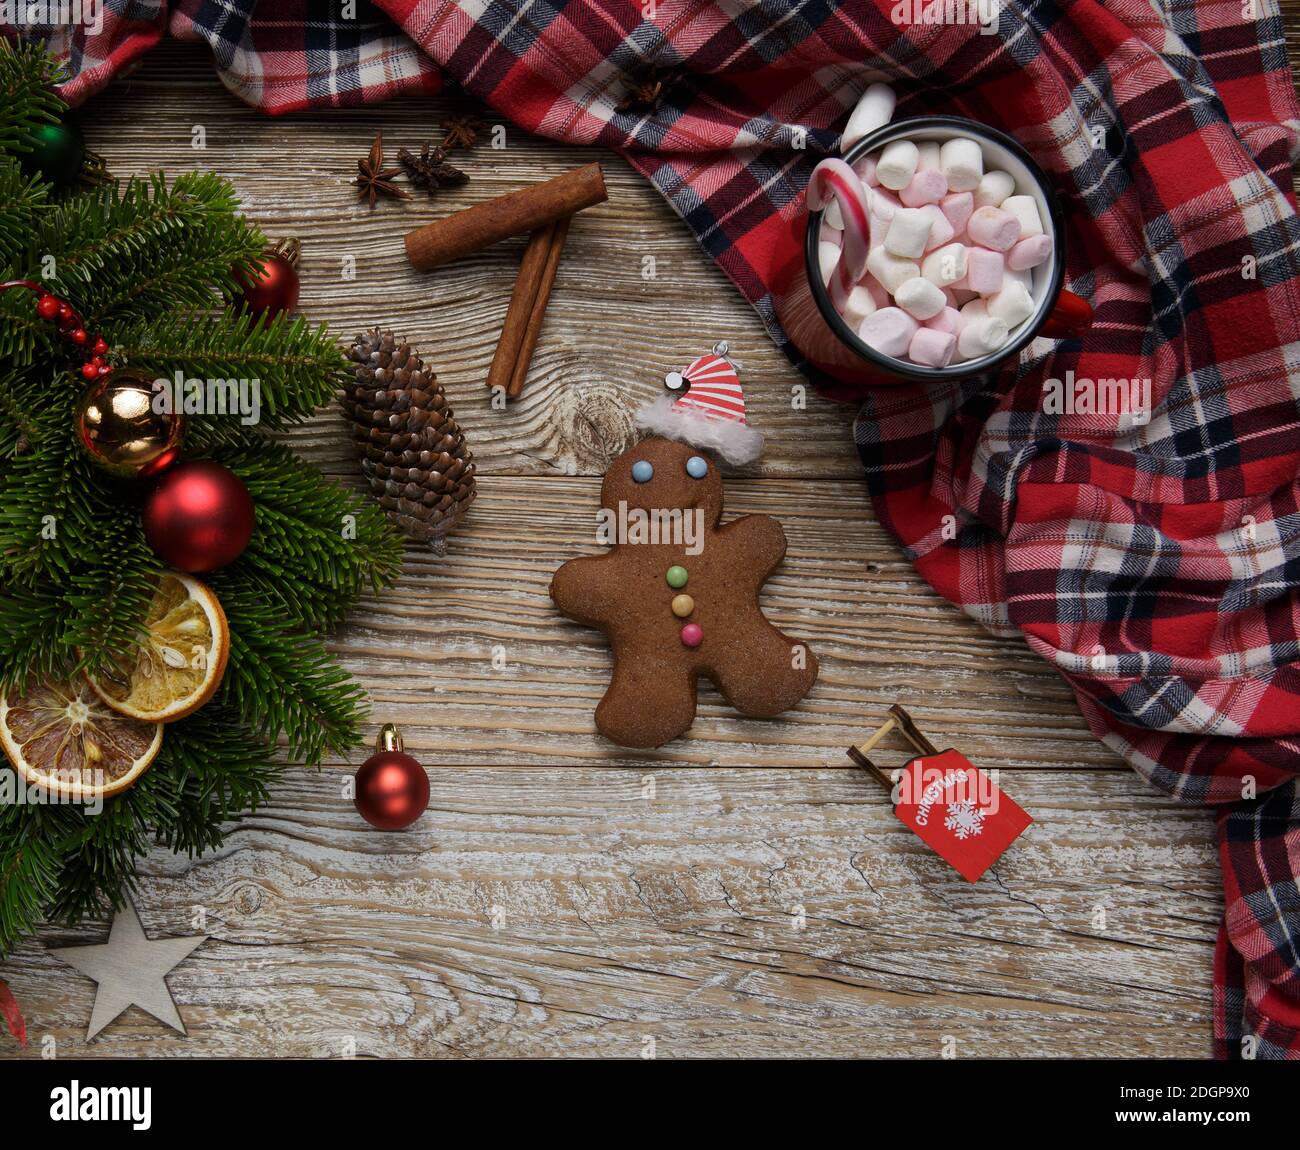 decorated Christmas wreath on a wooden old table. near toys and gingerbread Stock Photo